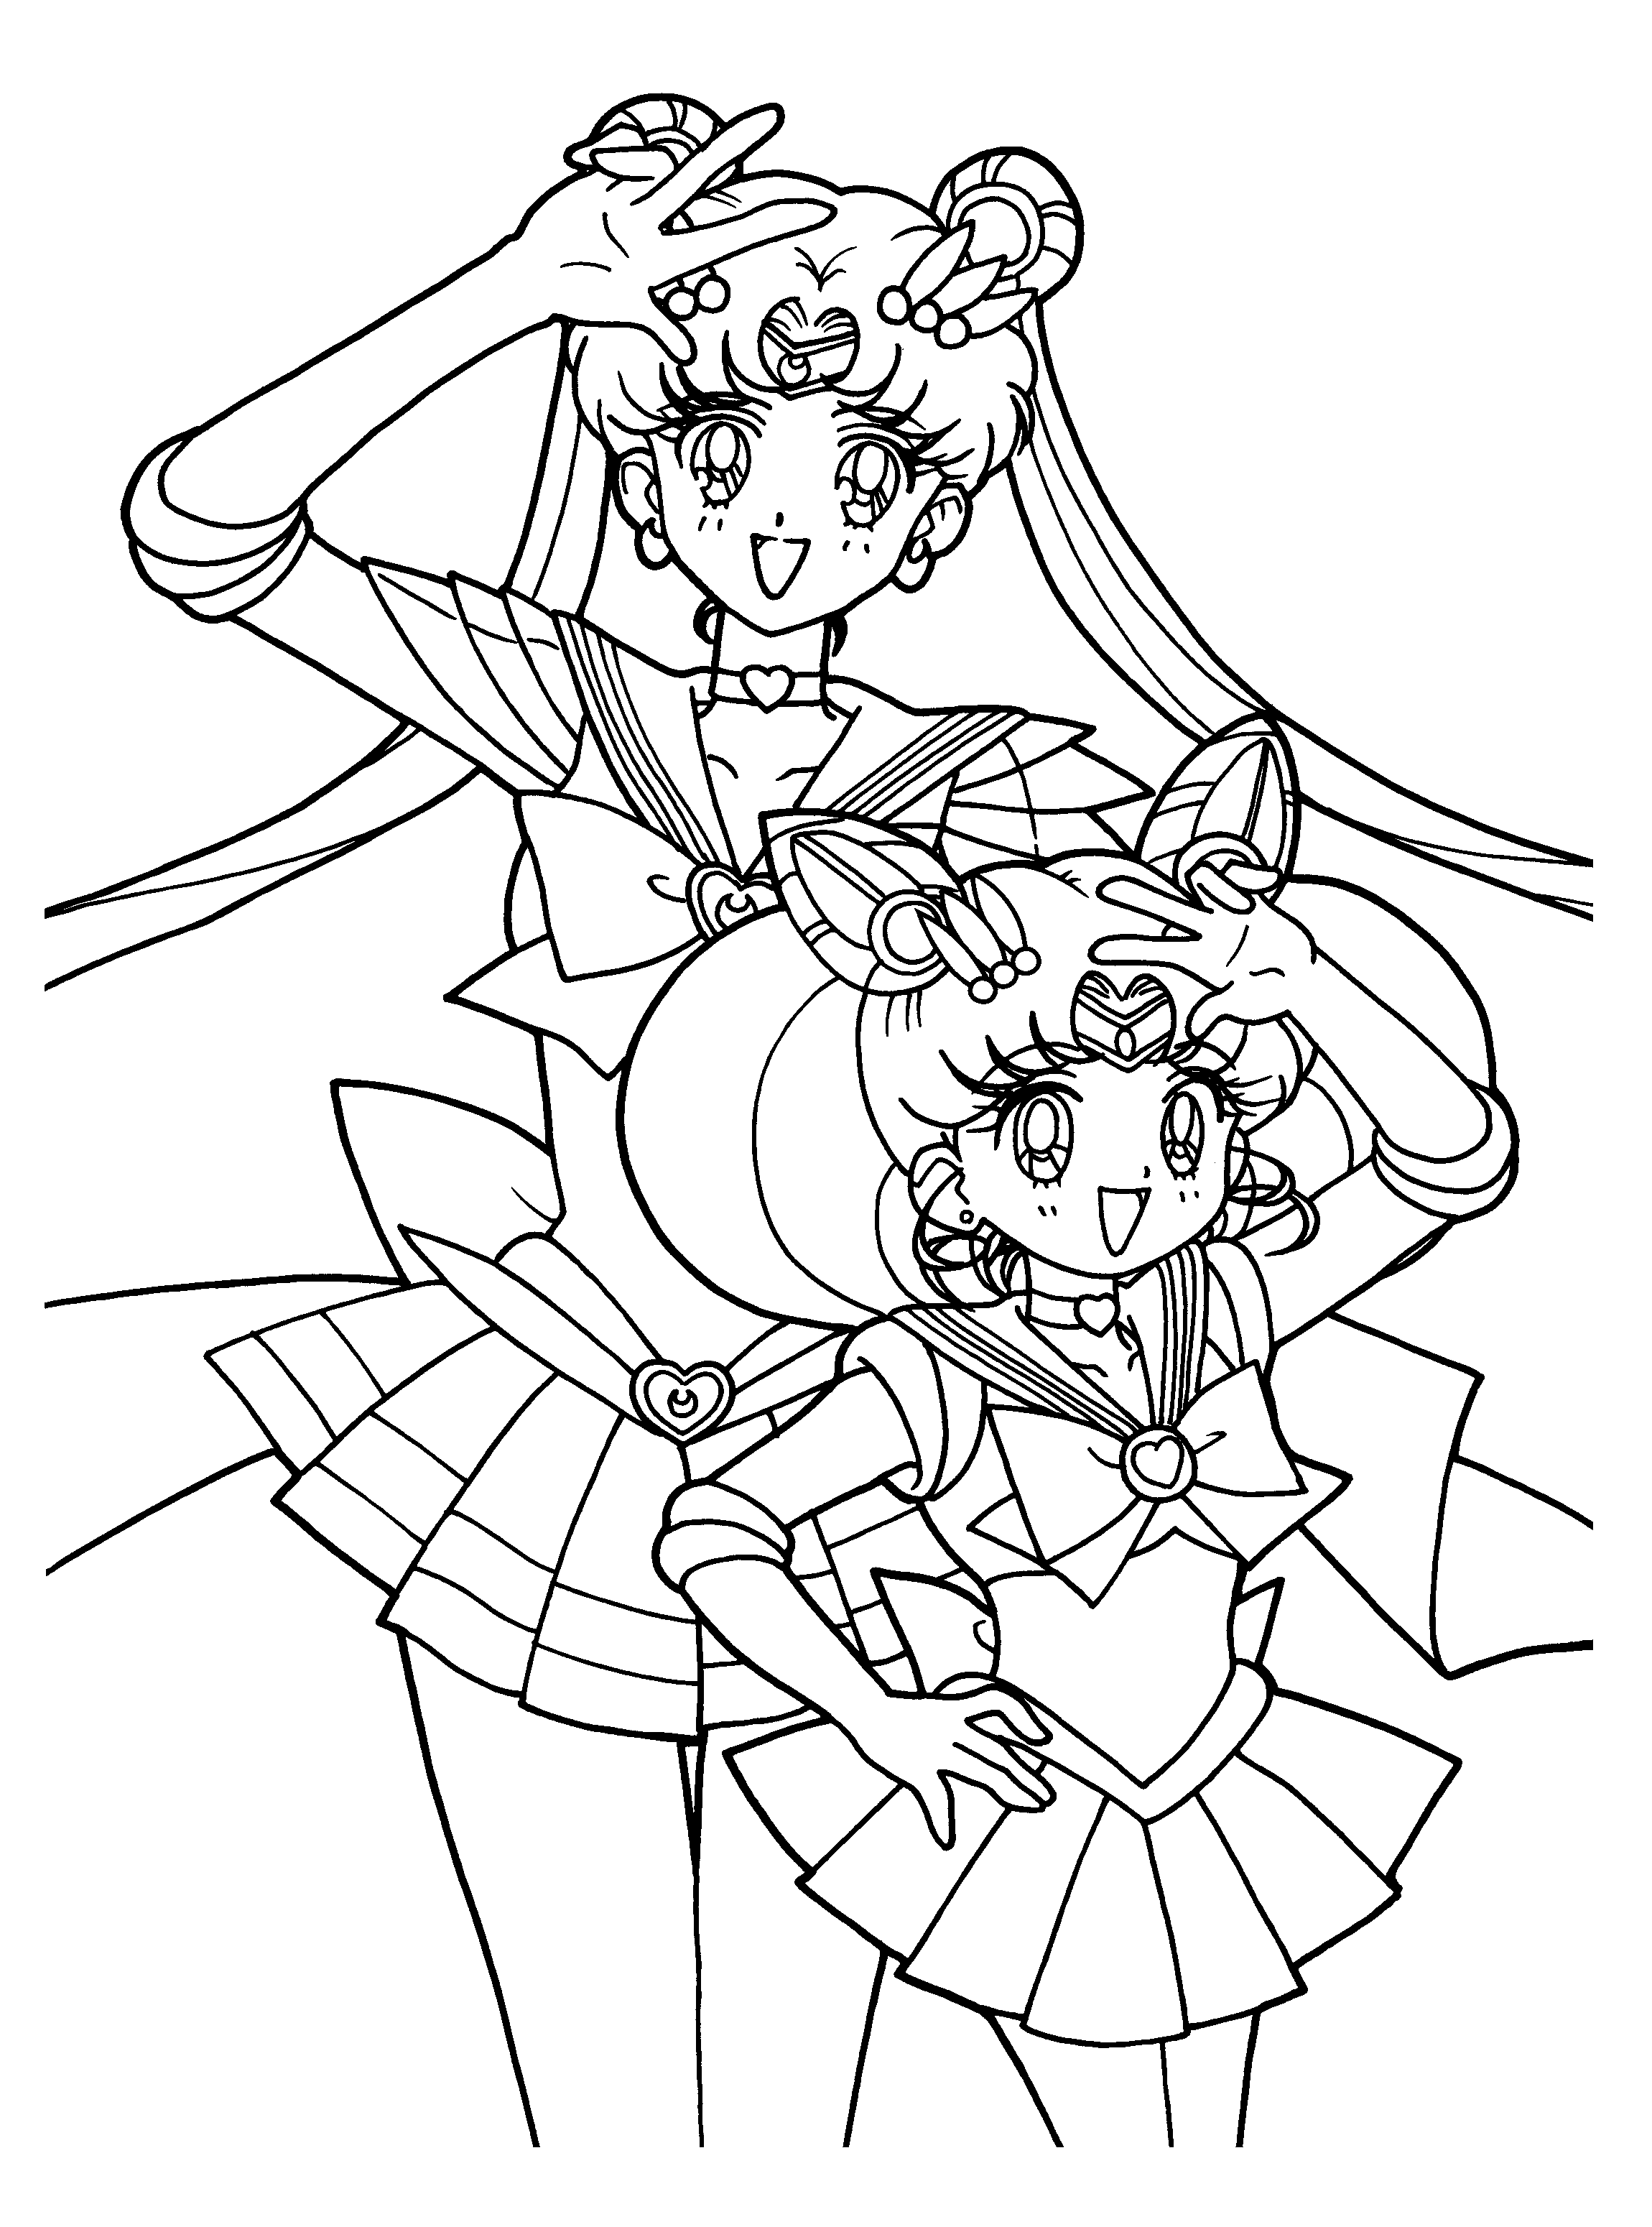 Download Free Printable Sailor Moon Coloring Pages For Kids